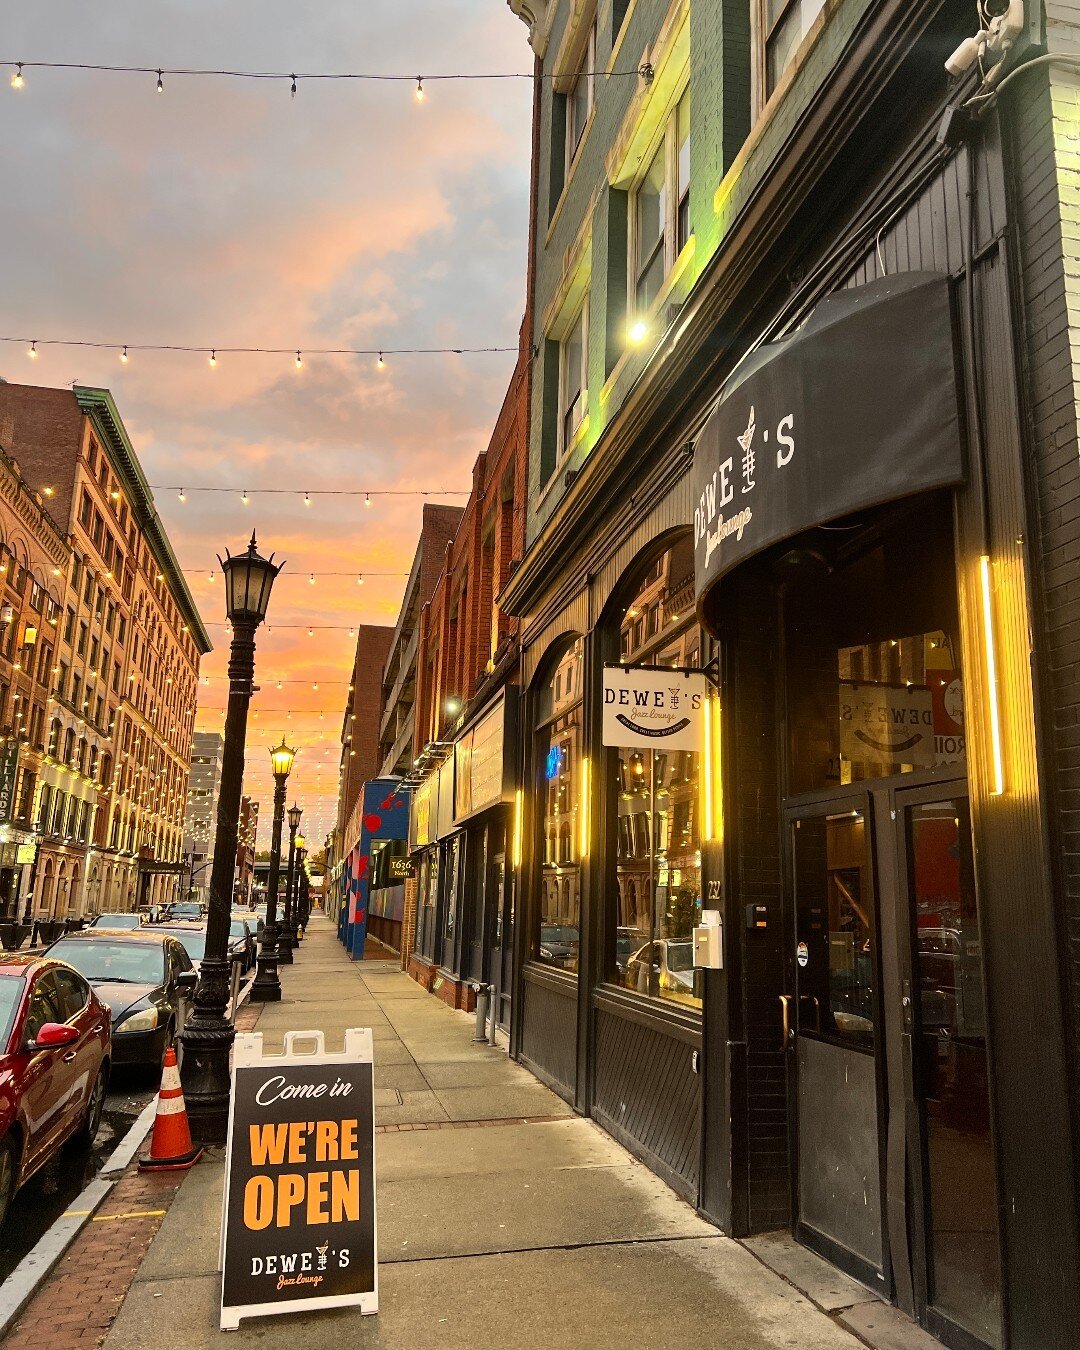 It's time to shed the winter blues 🌅 

Now that it's officially spring, we're walking into this new season feeling refreshed and ready for what's to come, starting with:

🌷 Today: $10 Appy Hour (5-7pm)
🌷 Tomorrow: Samples Party with DJ Prince @ 9p